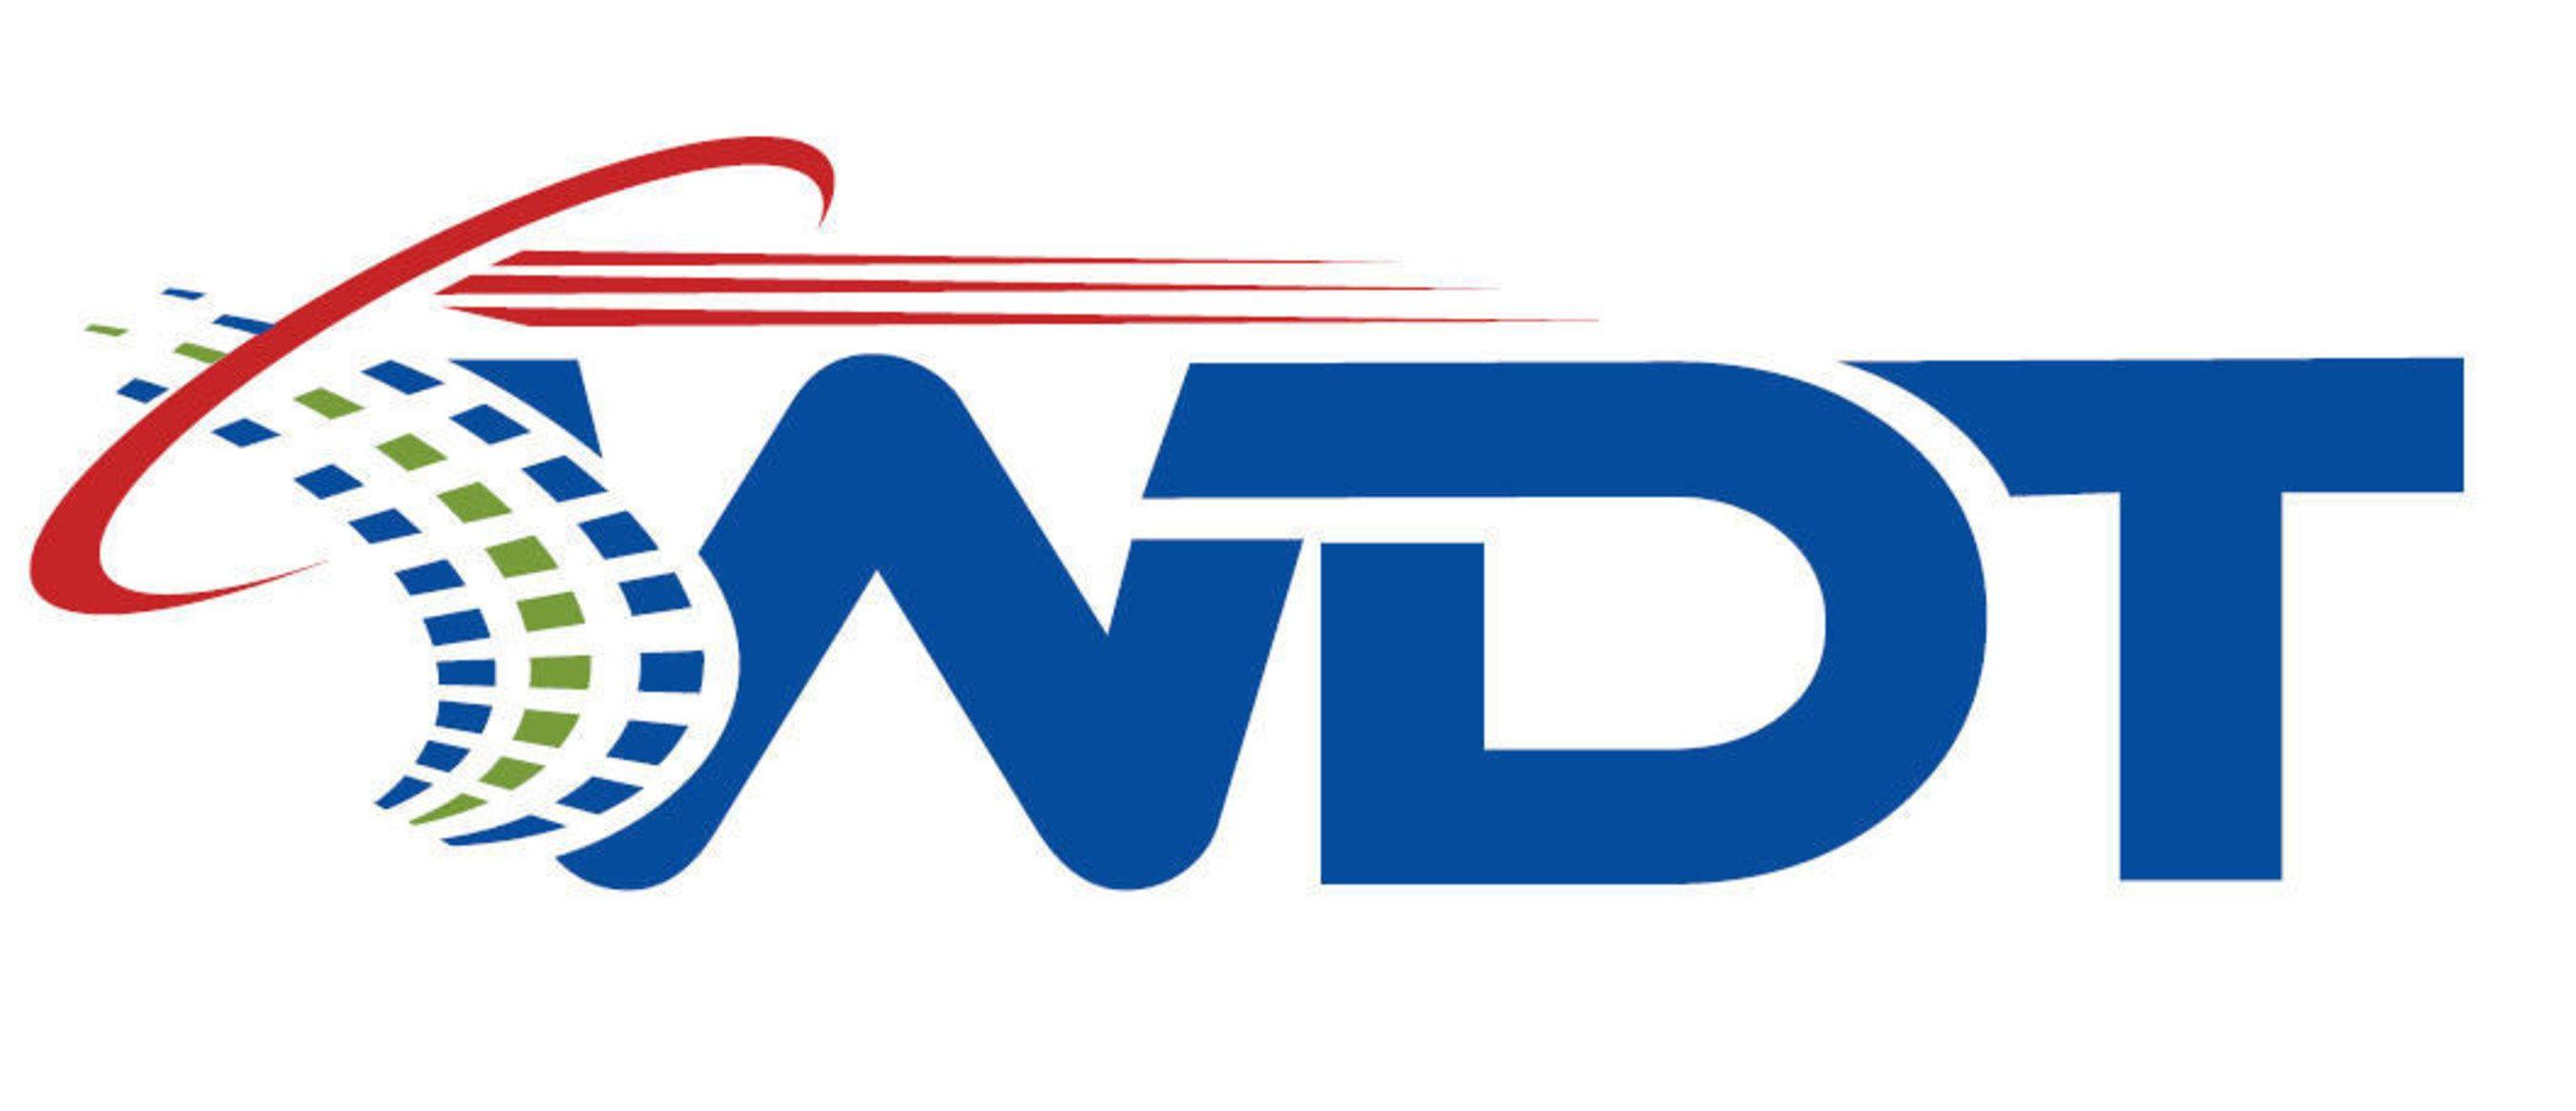 WDT Logo - DTN signs agreement to acquire weather decision technologies